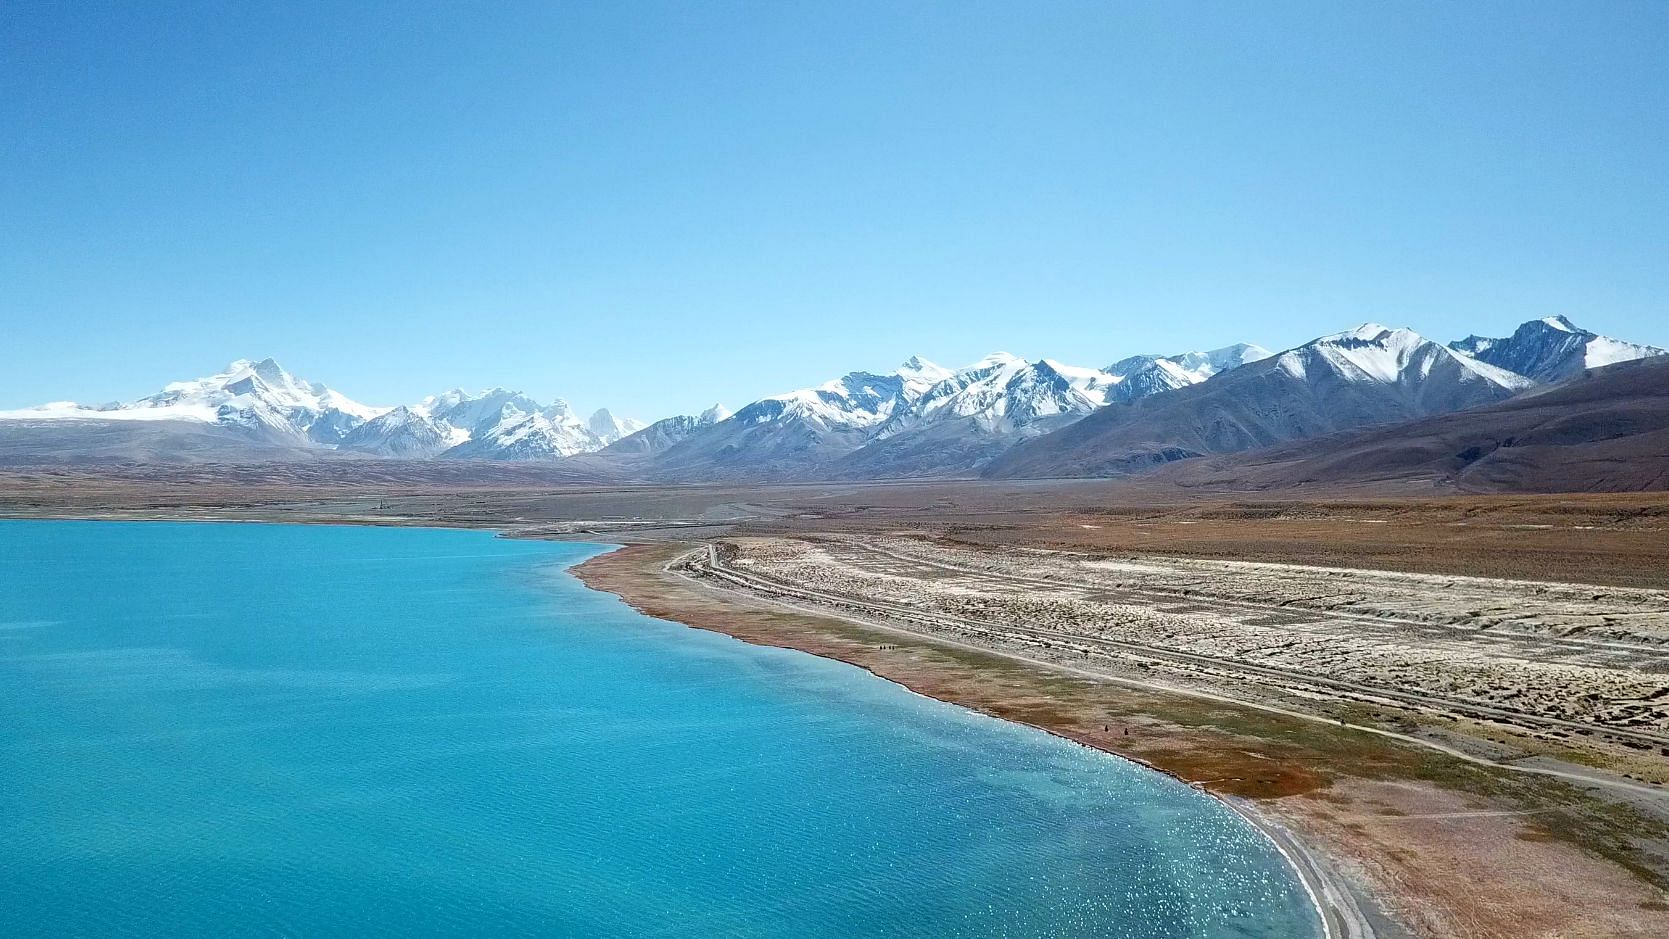 A view of Paiku Lake, Tibet, en-route to Rongbuk when riding to the Mt. Everest North Base Camp.